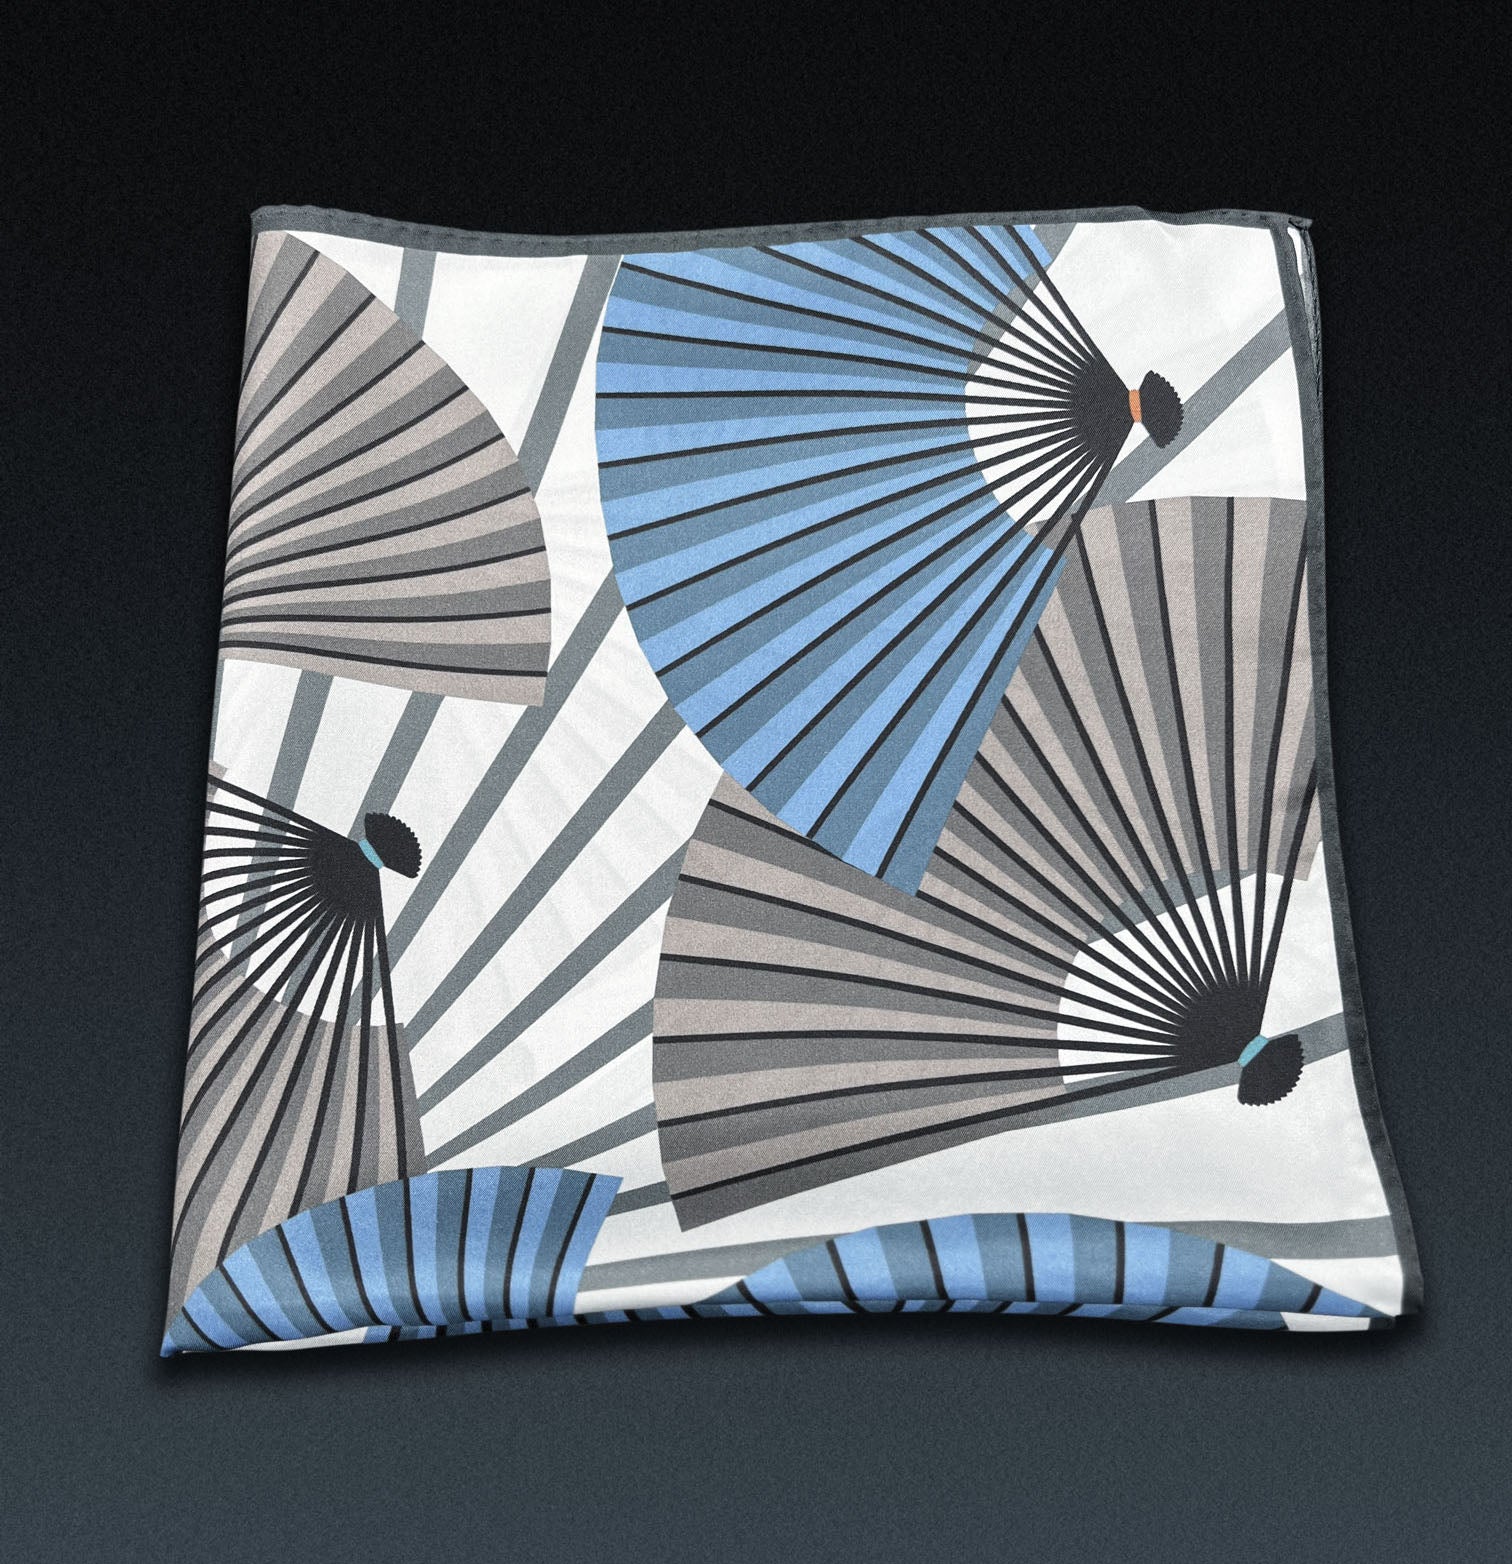 'The Fan' neckerchief folded into a quarter, showing layered blue and grey fan motif on an off-white background.